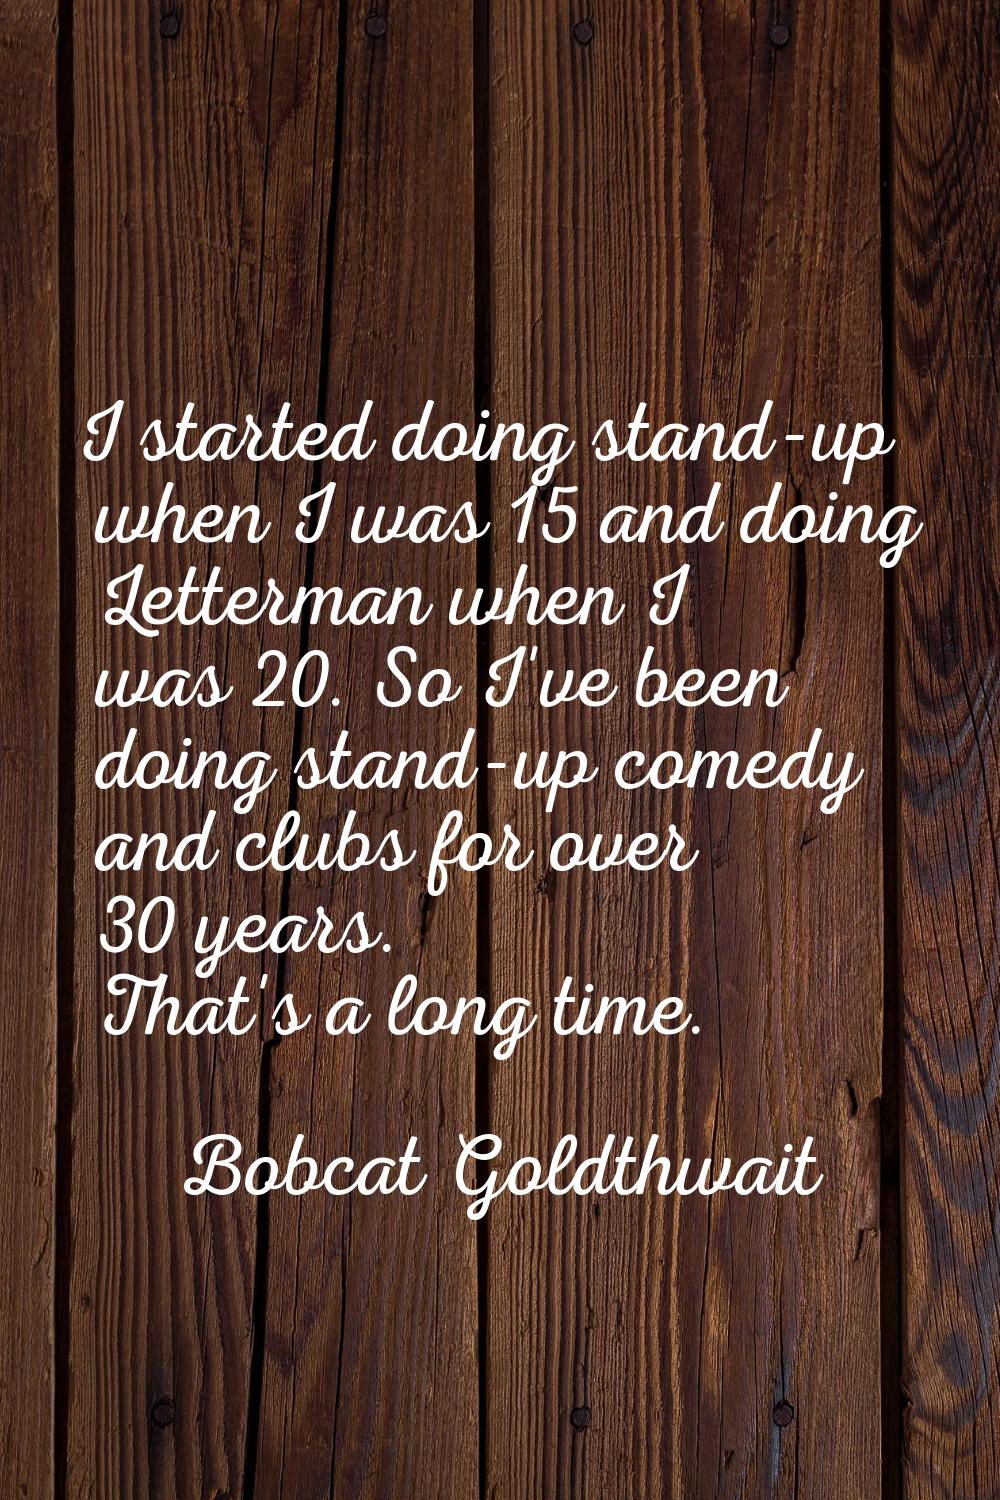 I started doing stand-up when I was 15 and doing Letterman when I was 20. So I've been doing stand-